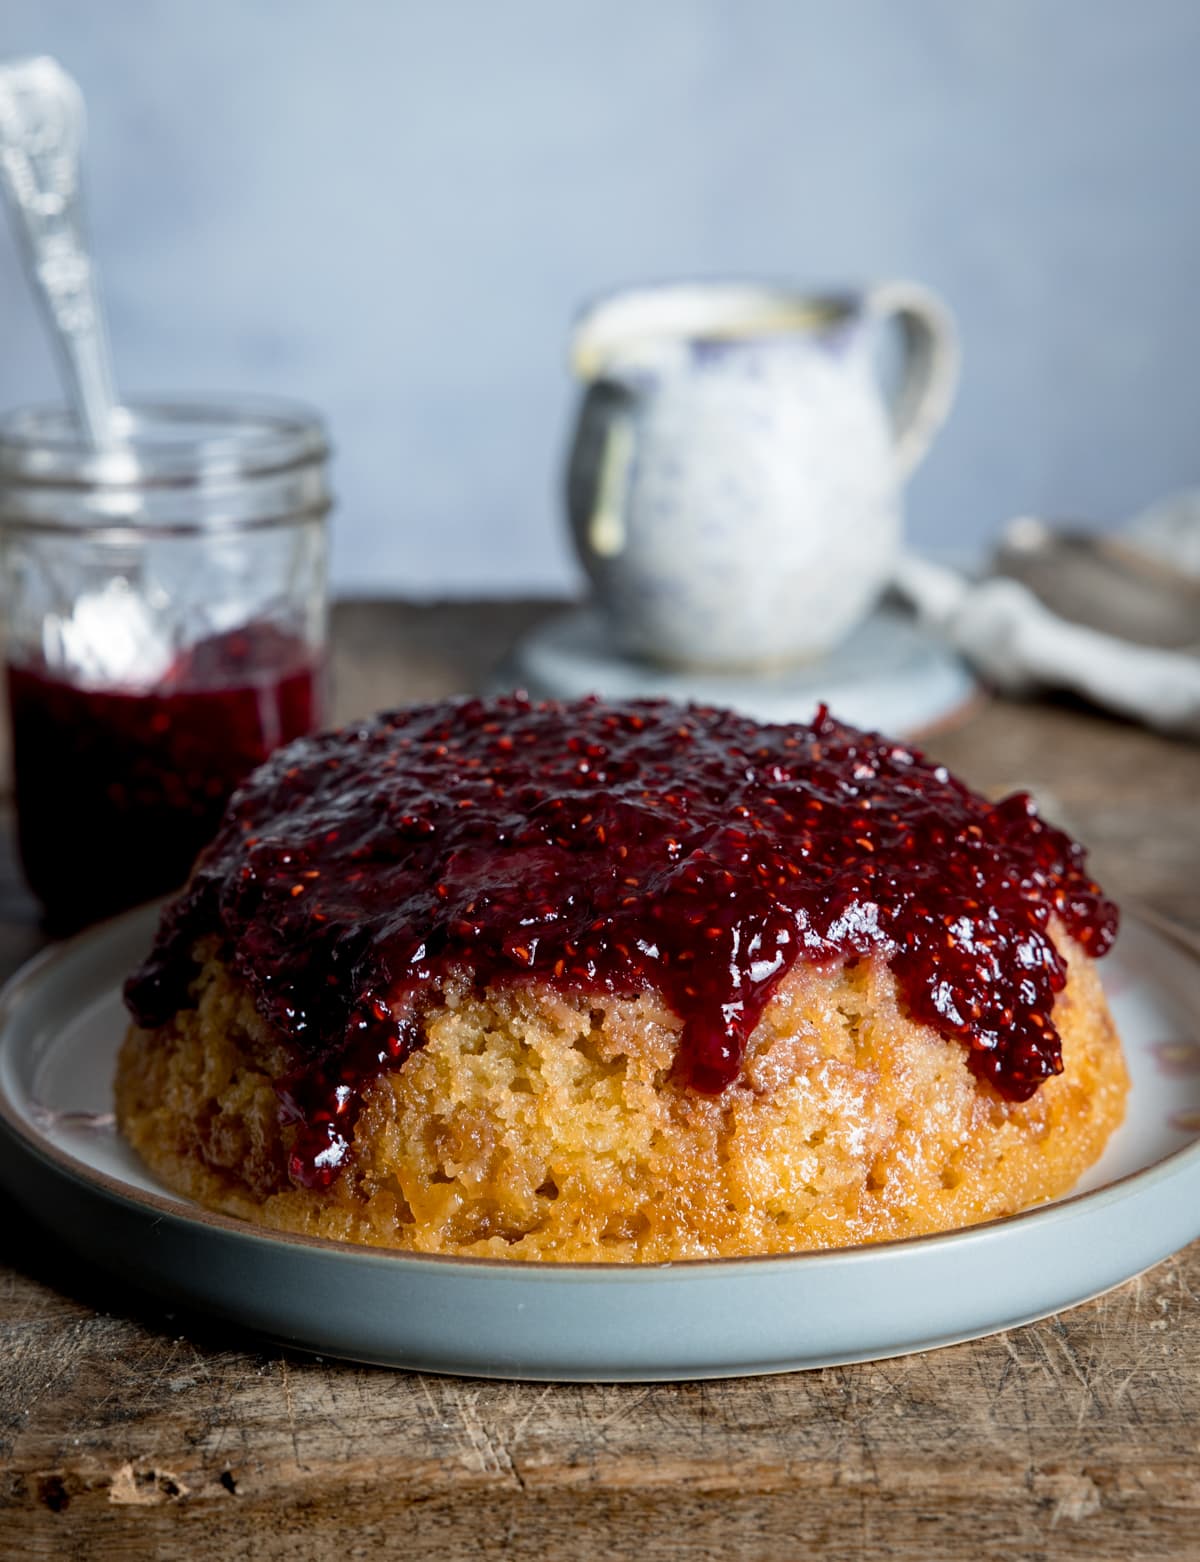 Picture of a steamed jam sponge on a grey plate thats sat on a wooden board with a jug of custard in the background.